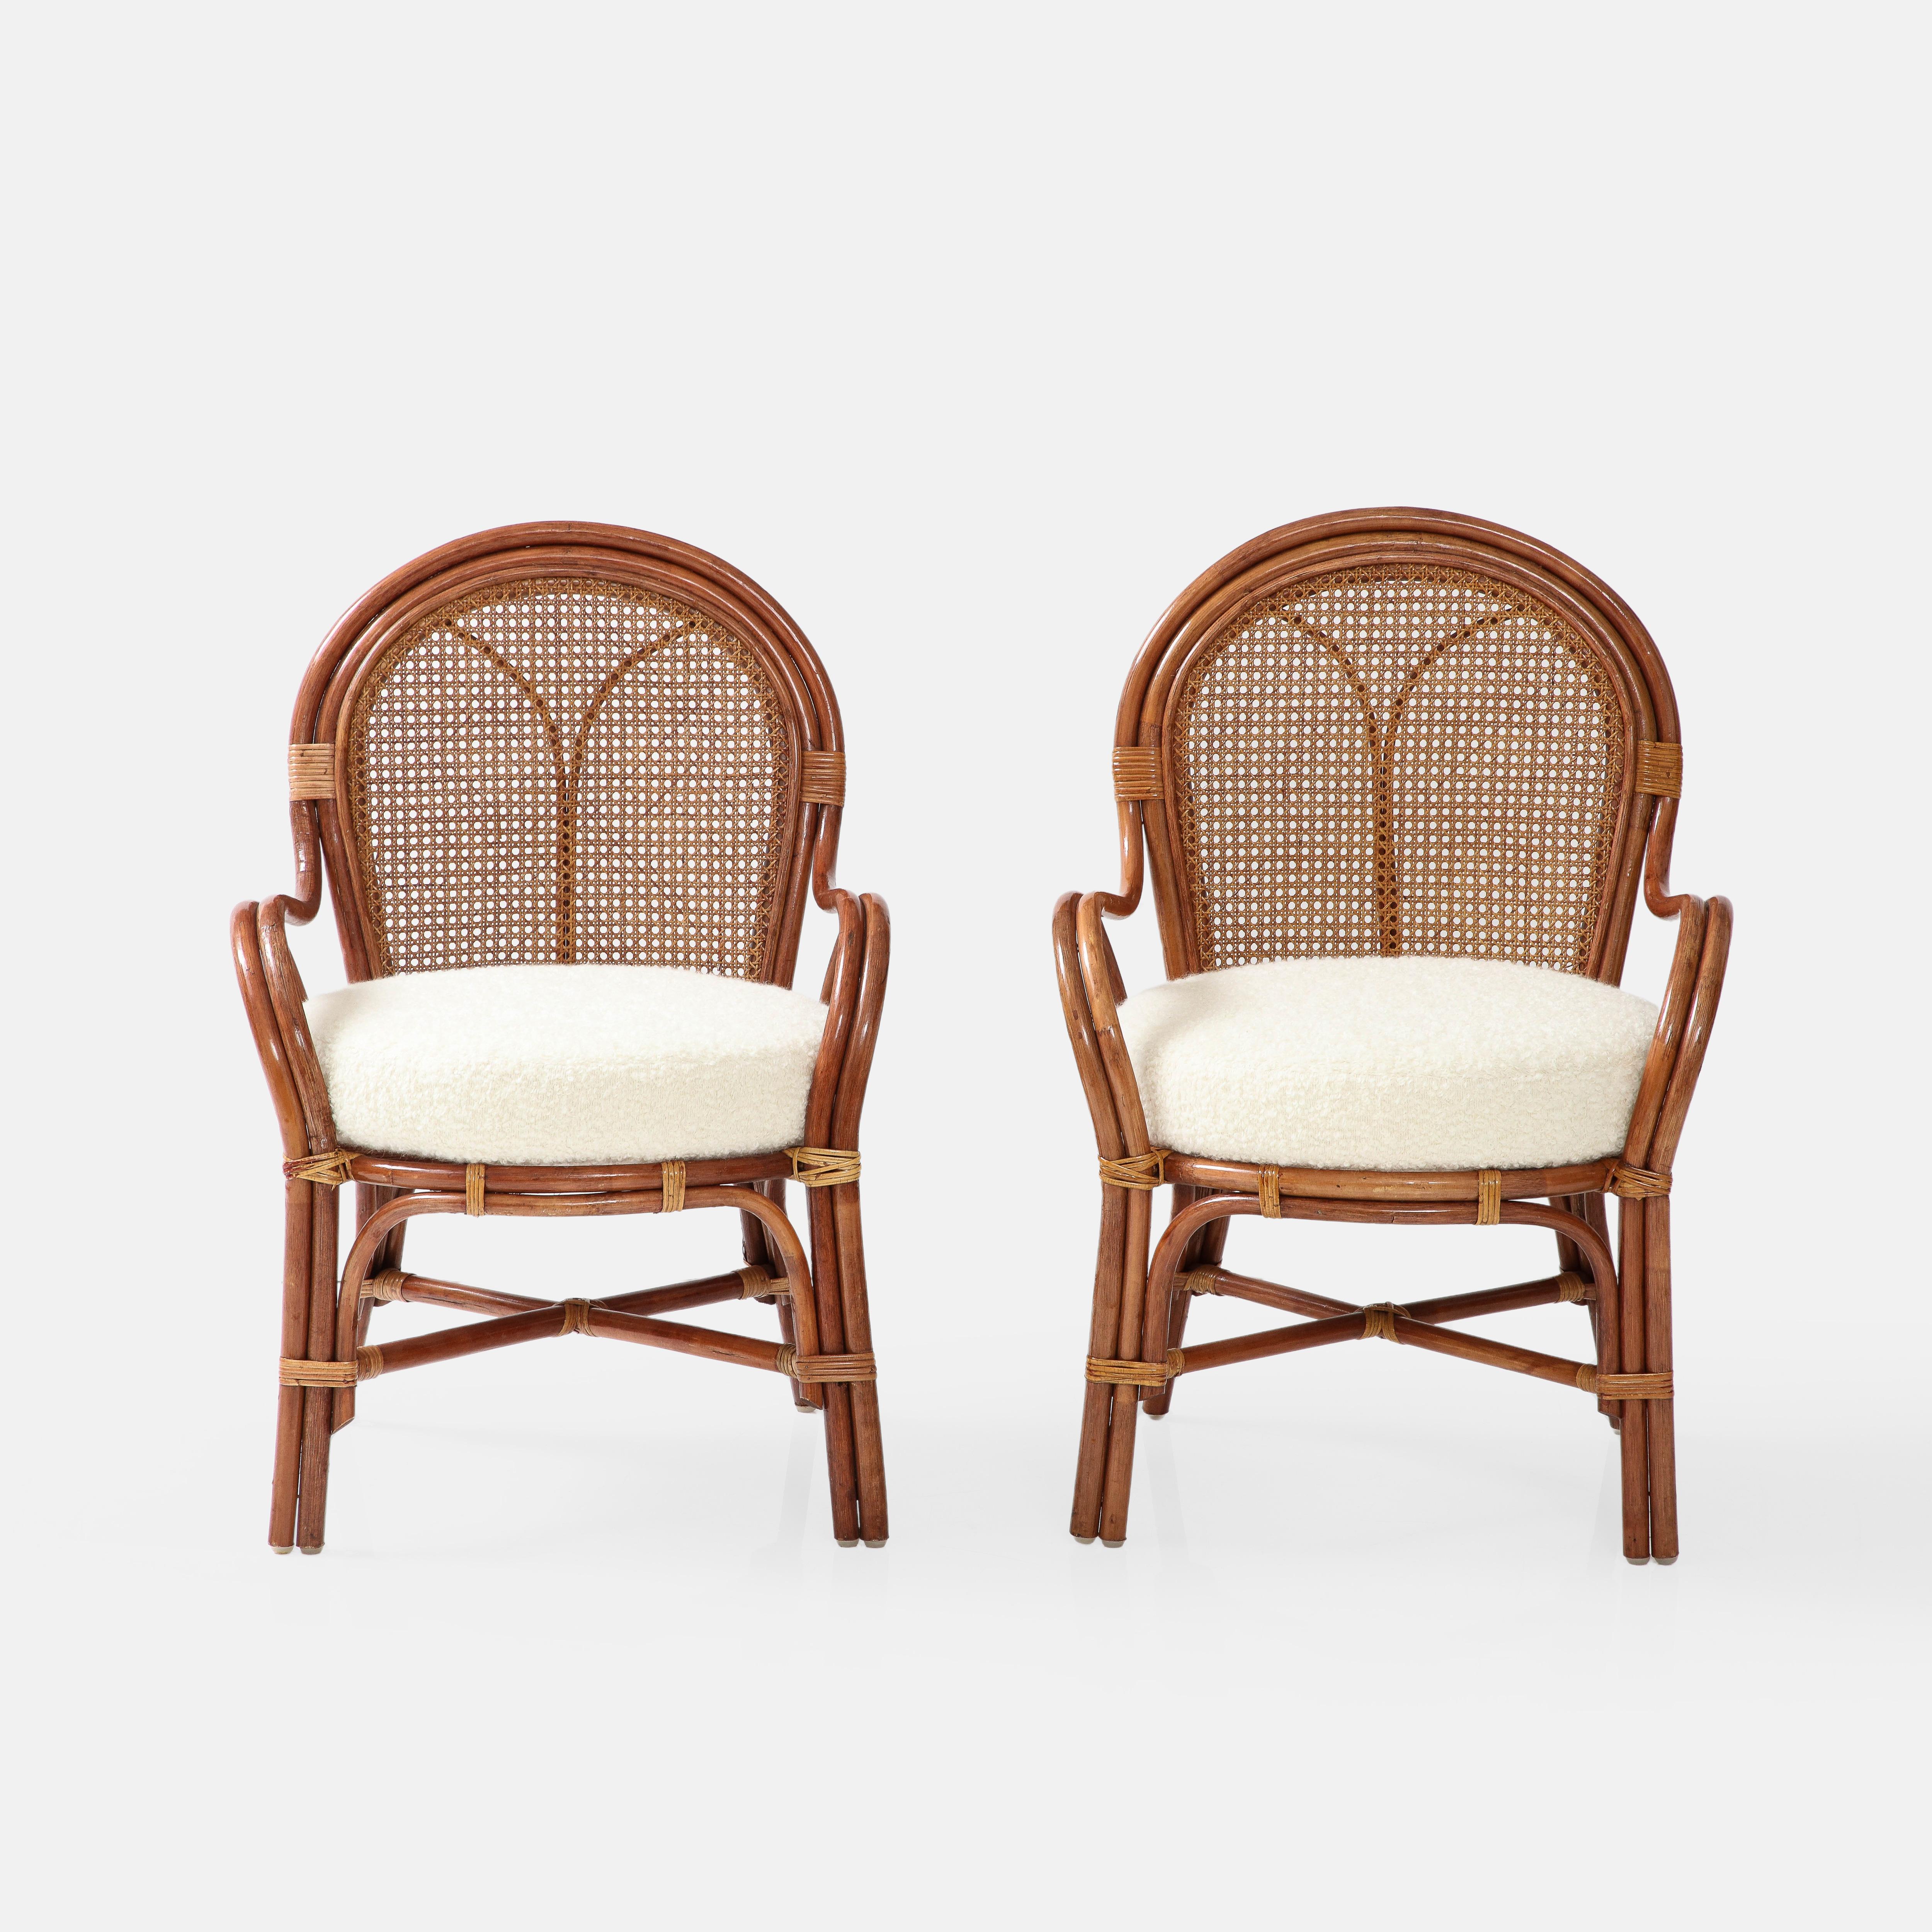 1950s Italian pair of bamboo and rattan armchairs with Vienna straw cane backs and ivory bouclé cushion seats.  This rarely seen vintage handmade armchairs exude elegance and charm in all the wonderful details. The organic bamboo frames are stained